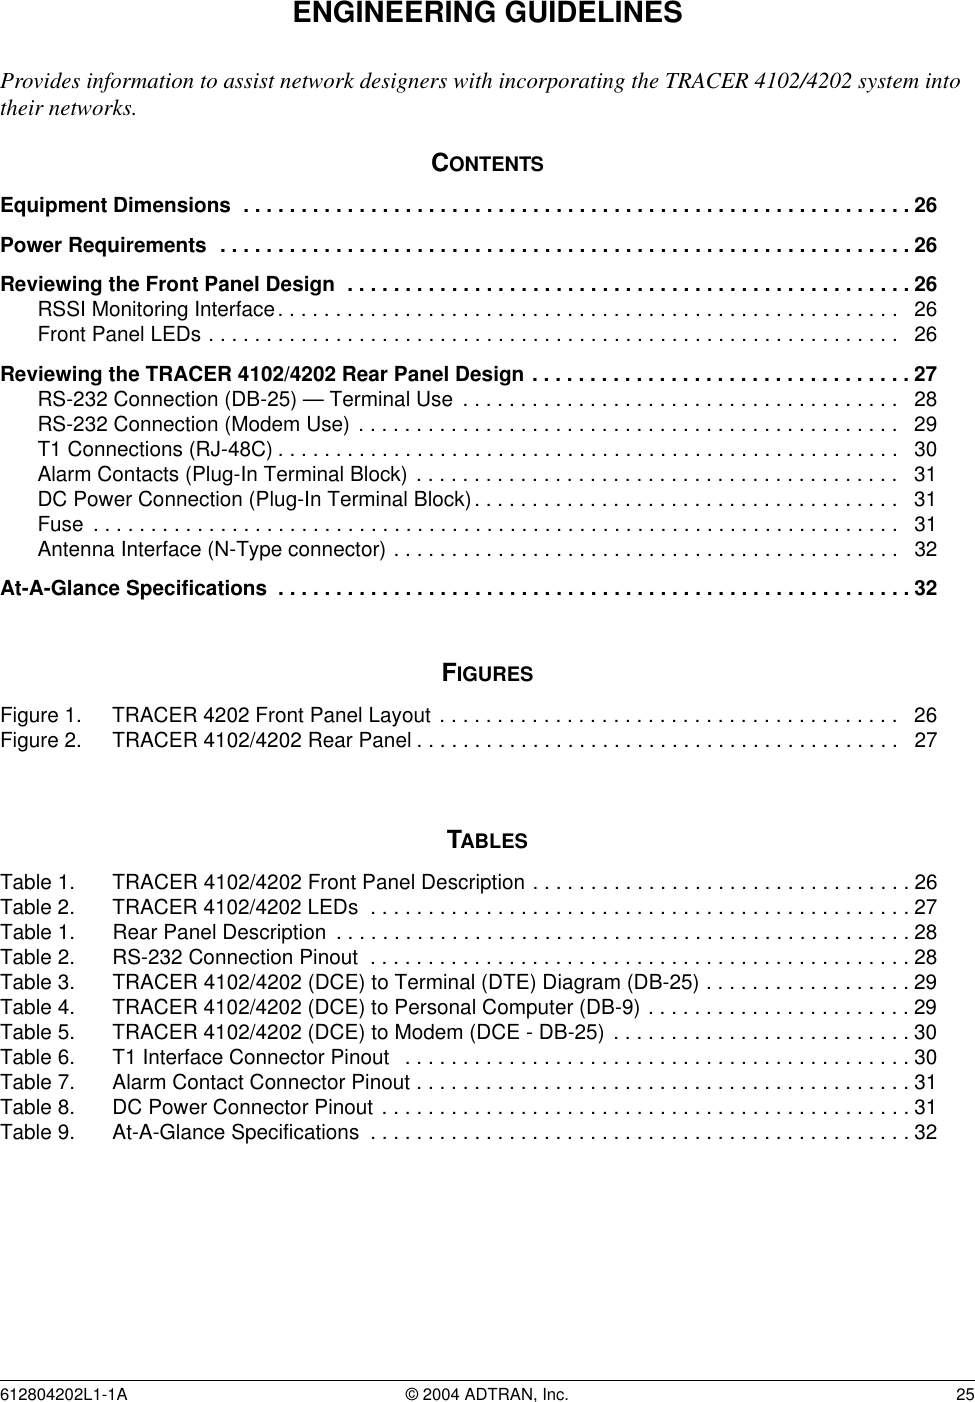 612804202L1-1A © 2004 ADTRAN, Inc.  25ENGINEERING GUIDELINESProvides information to assist network designers with incorporating the TRACER 4102/4202 system into their networks.CONTENTSEquipment Dimensions  . . . . . . . . . . . . . . . . . . . . . . . . . . . . . . . . . . . . . . . . . . . . . . . . . . . . . . . . . . 26Power Requirements  . . . . . . . . . . . . . . . . . . . . . . . . . . . . . . . . . . . . . . . . . . . . . . . . . . . . . . . . . . . . 26Reviewing the Front Panel Design  . . . . . . . . . . . . . . . . . . . . . . . . . . . . . . . . . . . . . . . . . . . . . . . . . 26RSSI Monitoring Interface. . . . . . . . . . . . . . . . . . . . . . . . . . . . . . . . . . . . . . . . . . . . . . . . . . . . . .   26Front Panel LEDs . . . . . . . . . . . . . . . . . . . . . . . . . . . . . . . . . . . . . . . . . . . . . . . . . . . . . . . . . . . .   26Reviewing the TRACER 4102/4202 Rear Panel Design . . . . . . . . . . . . . . . . . . . . . . . . . . . . . . . . . 27RS-232 Connection (DB-25) — Terminal Use  . . . . . . . . . . . . . . . . . . . . . . . . . . . . . . . . . . . . . .   28RS-232 Connection (Modem Use) . . . . . . . . . . . . . . . . . . . . . . . . . . . . . . . . . . . . . . . . . . . . . . .   29T1 Connections (RJ-48C) . . . . . . . . . . . . . . . . . . . . . . . . . . . . . . . . . . . . . . . . . . . . . . . . . . . . . .   30Alarm Contacts (Plug-In Terminal Block) . . . . . . . . . . . . . . . . . . . . . . . . . . . . . . . . . . . . . . . . . .   31DC Power Connection (Plug-In Terminal Block). . . . . . . . . . . . . . . . . . . . . . . . . . . . . . . . . . . . .   31Fuse  . . . . . . . . . . . . . . . . . . . . . . . . . . . . . . . . . . . . . . . . . . . . . . . . . . . . . . . . . . . . . . . . . . . . . .   31Antenna Interface (N-Type connector) . . . . . . . . . . . . . . . . . . . . . . . . . . . . . . . . . . . . . . . . . . . .   32At-A-Glance Specifications  . . . . . . . . . . . . . . . . . . . . . . . . . . . . . . . . . . . . . . . . . . . . . . . . . . . . . . . 32FIGURESFigure 1. TRACER 4202 Front Panel Layout . . . . . . . . . . . . . . . . . . . . . . . . . . . . . . . . . . . . . . . .   26Figure 2. TRACER 4102/4202 Rear Panel . . . . . . . . . . . . . . . . . . . . . . . . . . . . . . . . . . . . . . . . . .   27TABLESTable 1. TRACER 4102/4202 Front Panel Description . . . . . . . . . . . . . . . . . . . . . . . . . . . . . . . . . 26Table 2. TRACER 4102/4202 LEDs  . . . . . . . . . . . . . . . . . . . . . . . . . . . . . . . . . . . . . . . . . . . . . . . 27Table 1. Rear Panel Description  . . . . . . . . . . . . . . . . . . . . . . . . . . . . . . . . . . . . . . . . . . . . . . . . . . 28Table 2. RS-232 Connection Pinout  . . . . . . . . . . . . . . . . . . . . . . . . . . . . . . . . . . . . . . . . . . . . . . . 28Table 3. TRACER 4102/4202 (DCE) to Terminal (DTE) Diagram (DB-25) . . . . . . . . . . . . . . . . . . 29Table 4. TRACER 4102/4202 (DCE) to Personal Computer (DB-9) . . . . . . . . . . . . . . . . . . . . . . . 29Table 5. TRACER 4102/4202 (DCE) to Modem (DCE - DB-25)  . . . . . . . . . . . . . . . . . . . . . . . . . . 30Table 6. T1 Interface Connector Pinout   . . . . . . . . . . . . . . . . . . . . . . . . . . . . . . . . . . . . . . . . . . . . 30Table 7. Alarm Contact Connector Pinout . . . . . . . . . . . . . . . . . . . . . . . . . . . . . . . . . . . . . . . . . . . 31Table 8. DC Power Connector Pinout . . . . . . . . . . . . . . . . . . . . . . . . . . . . . . . . . . . . . . . . . . . . . . 31Table 9. At-A-Glance Specifications  . . . . . . . . . . . . . . . . . . . . . . . . . . . . . . . . . . . . . . . . . . . . . . .32